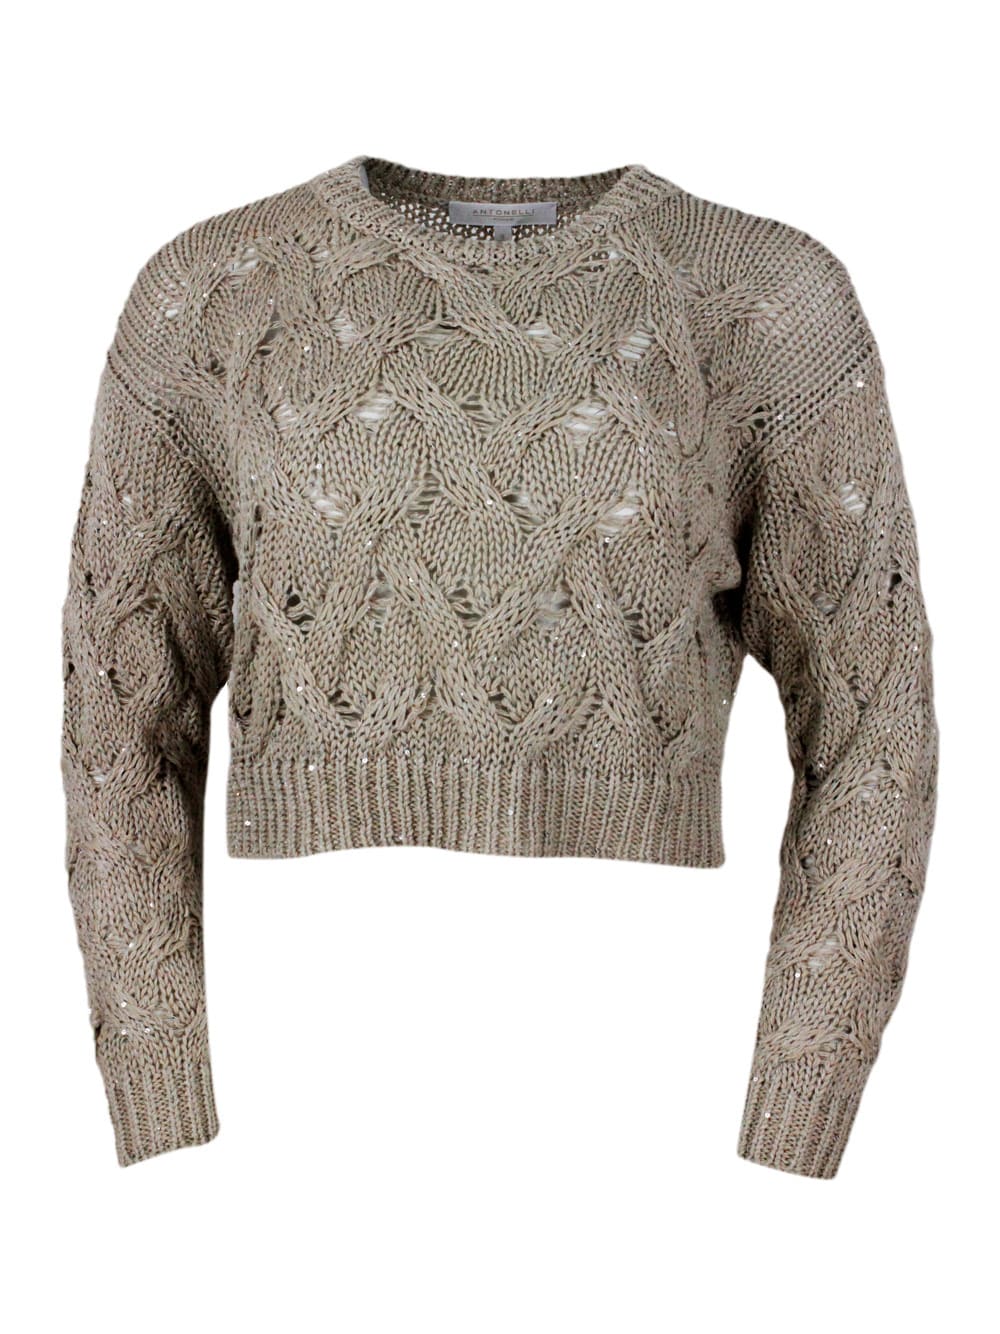 Long-sleeved Crew-neck Sweater With Braided Workmanship Embellished With Microsequins